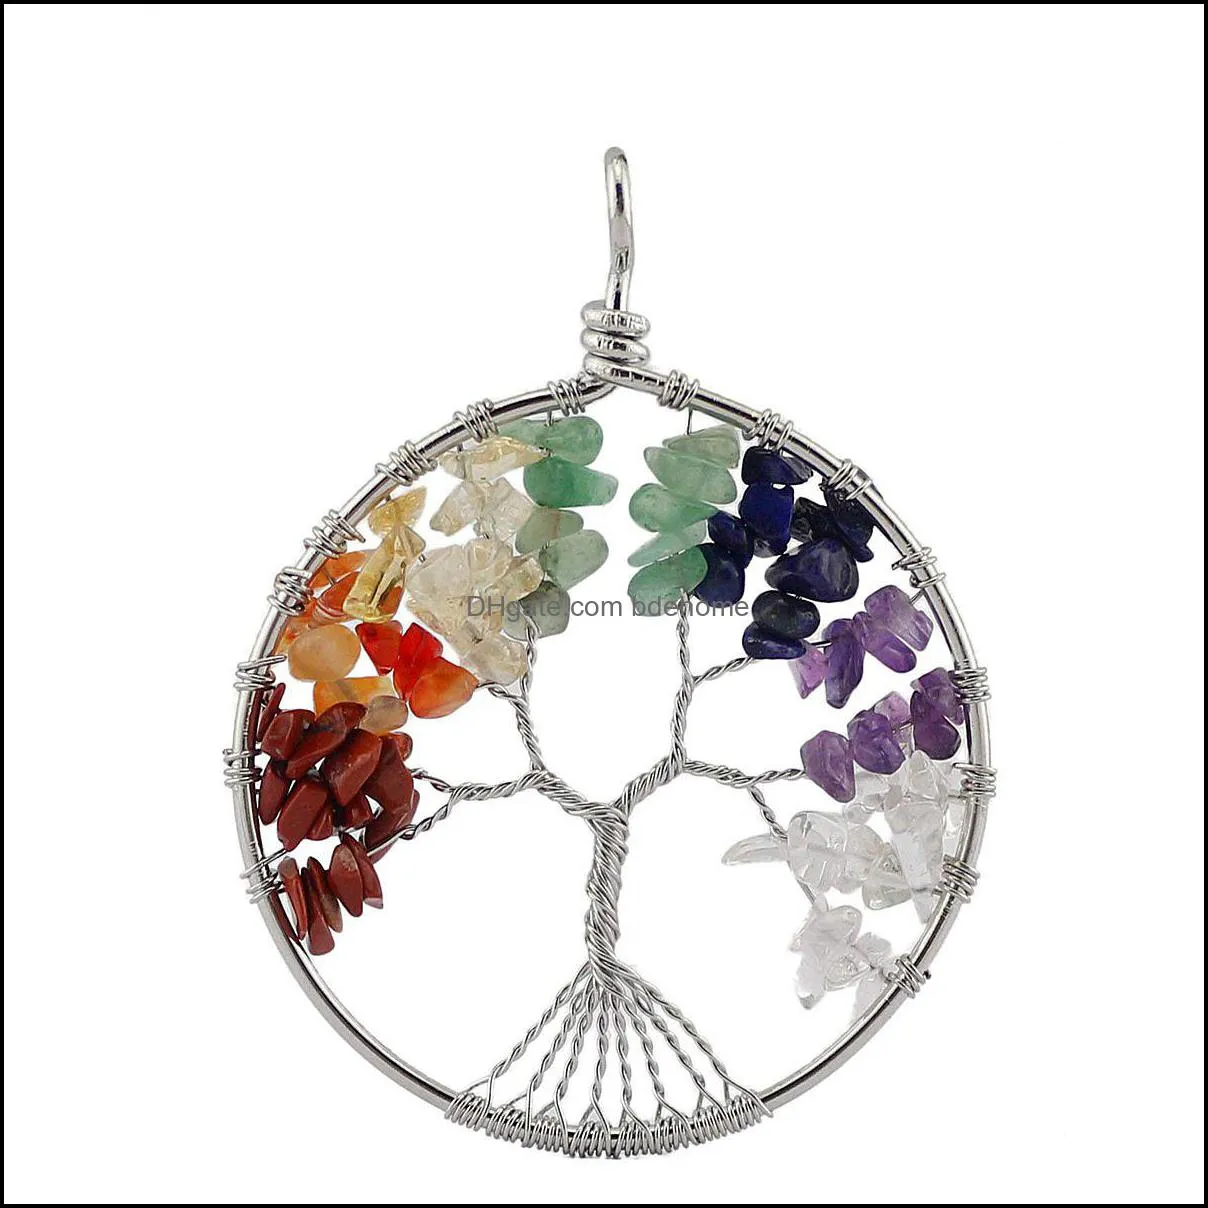 Natural Stone Necklaces Pendant Reiki Healing Tree of Life Pendant for Necklace Vintage Antique Stone Chip Bead Jewelry DIY Gift